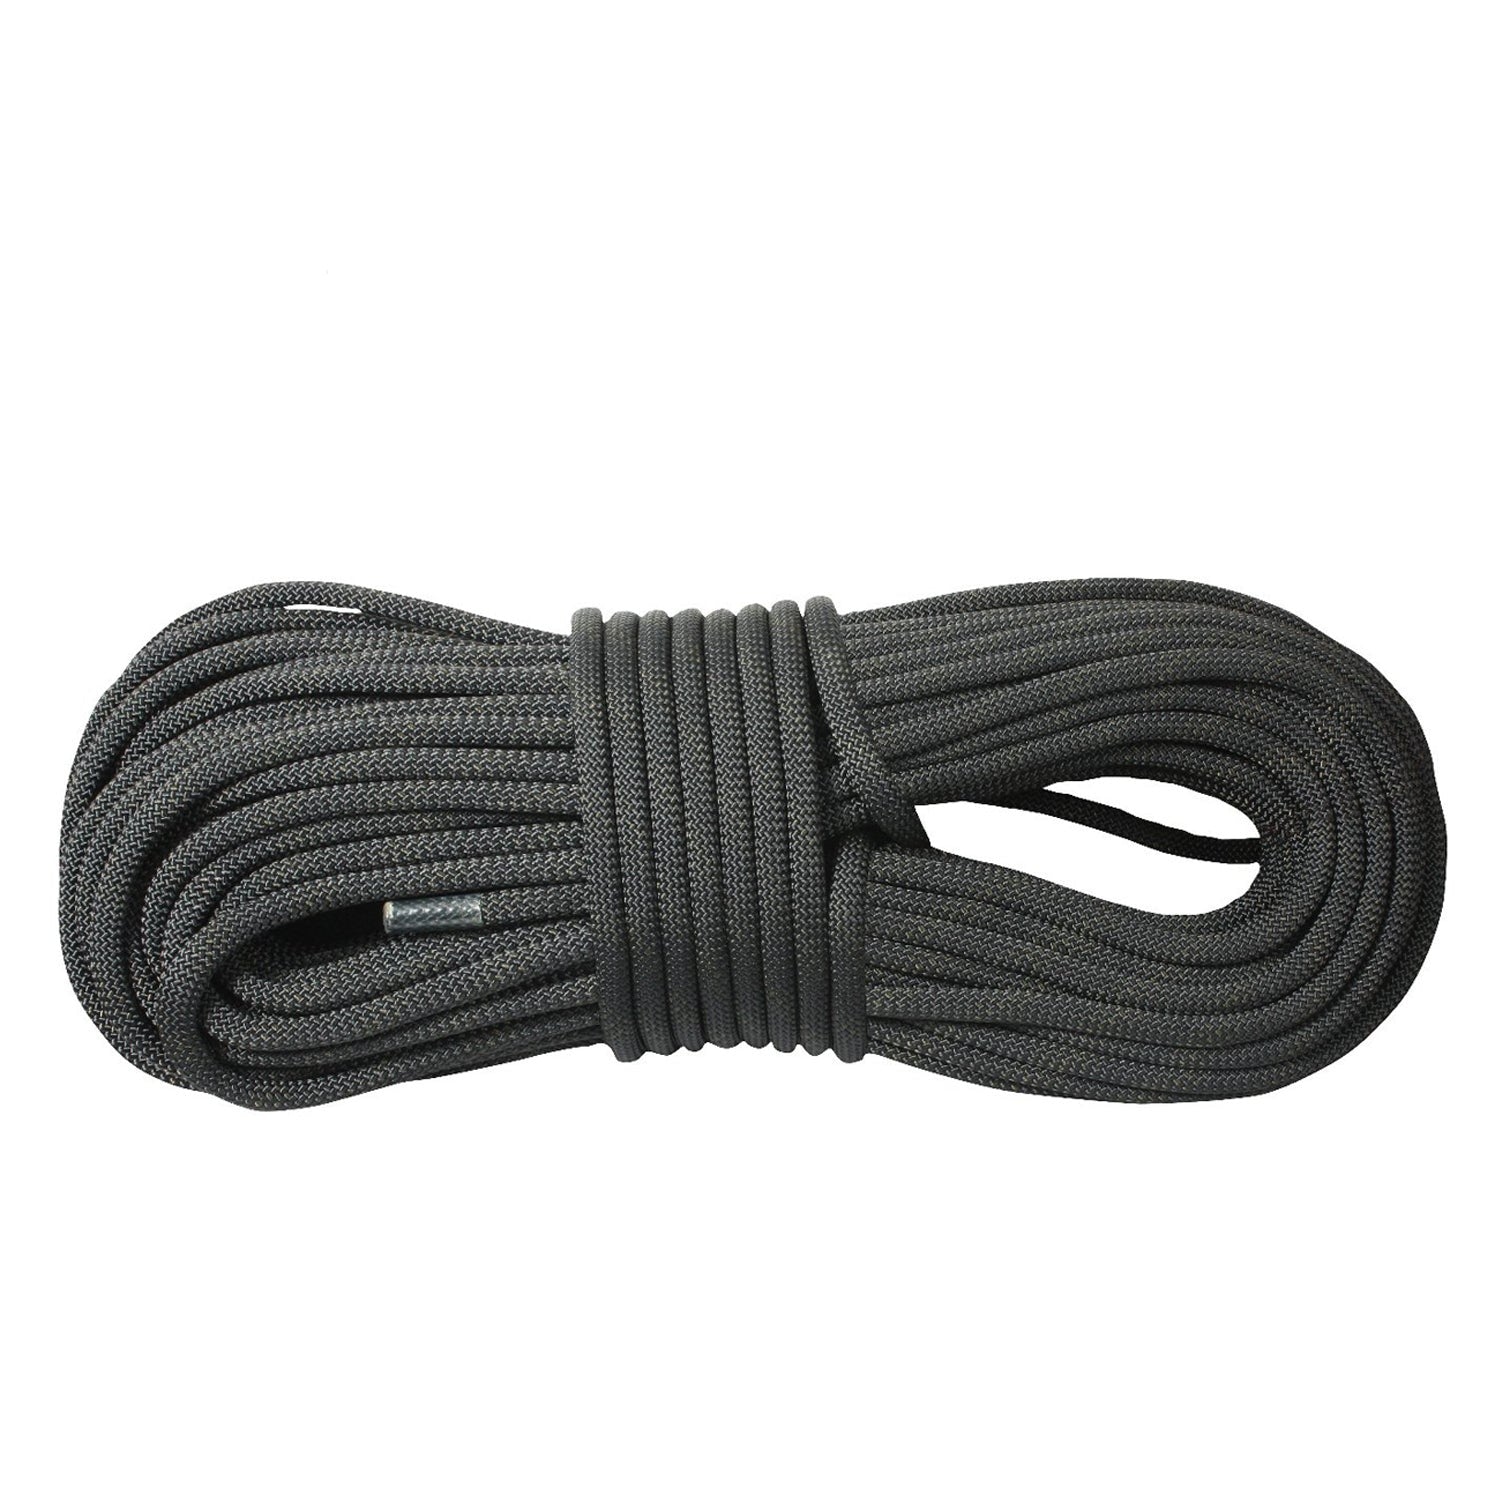 SWAT Rappelling Ropes - Tactical Choice Plus